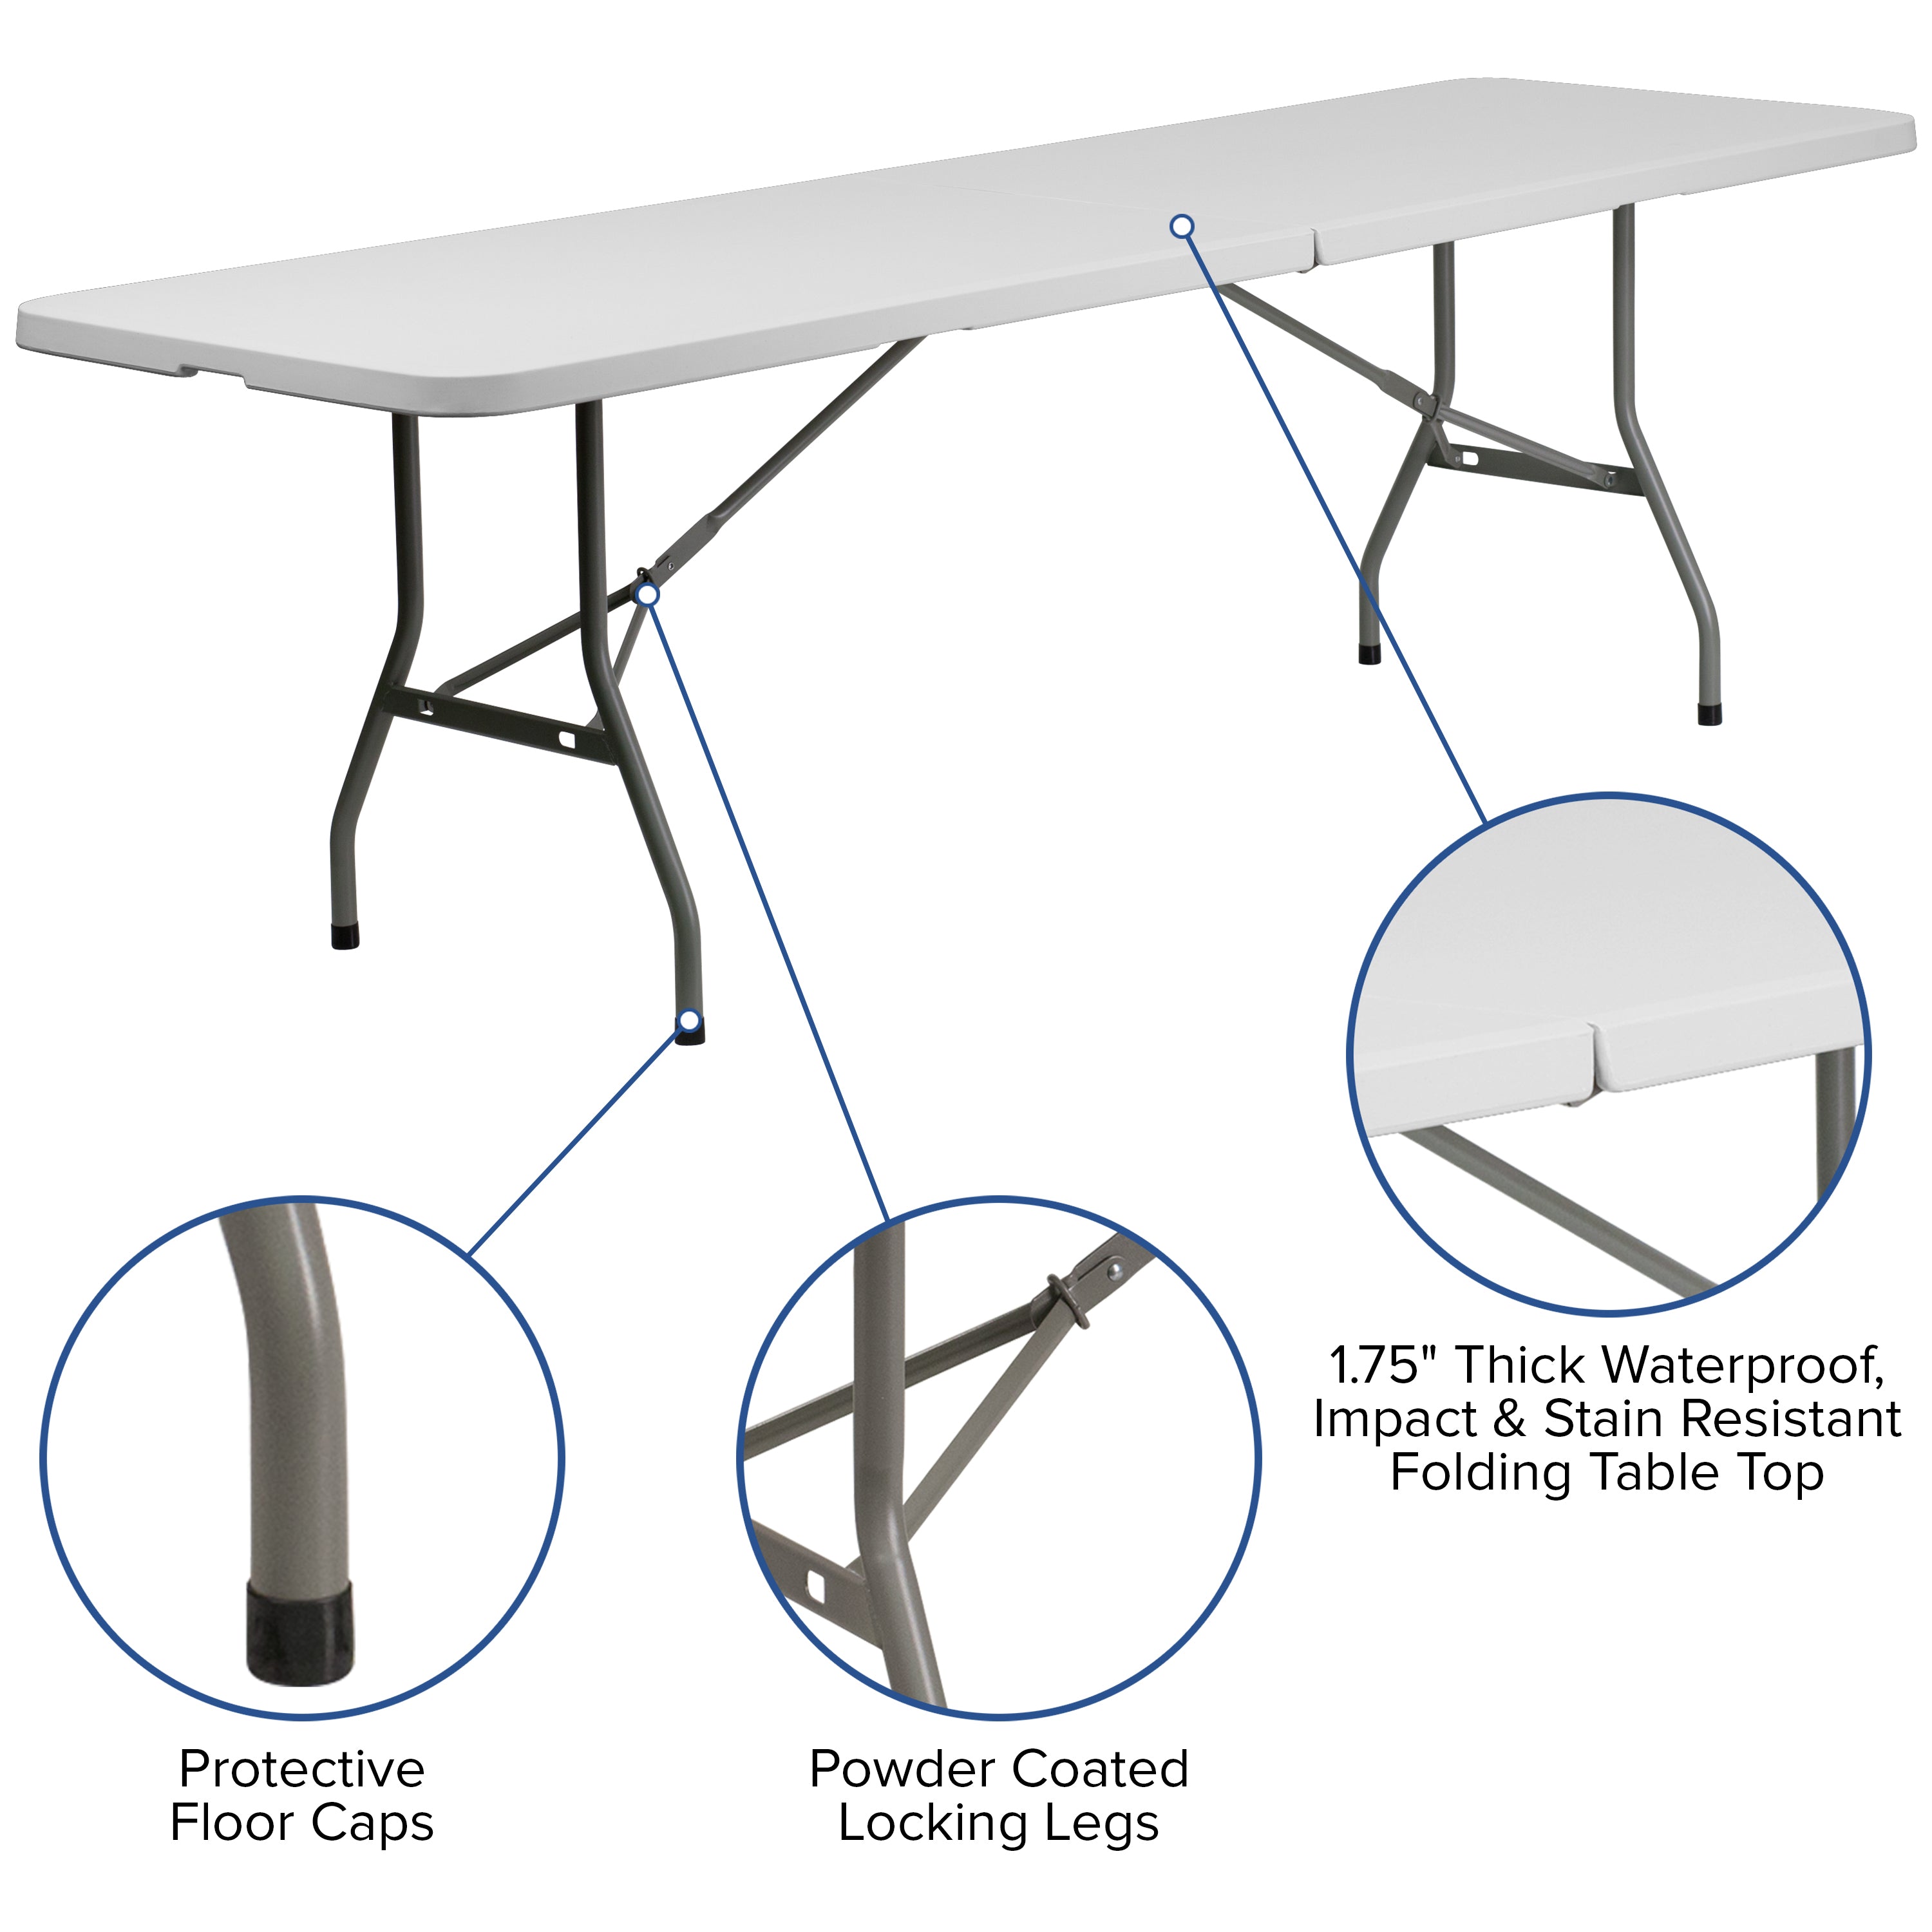 8-Foot Bi-Fold Plastic Banquet and Event Folding Table with Carrying Handle-Rectangular Plastic Folding Table-Flash Furniture-Wall2Wall Furnishings